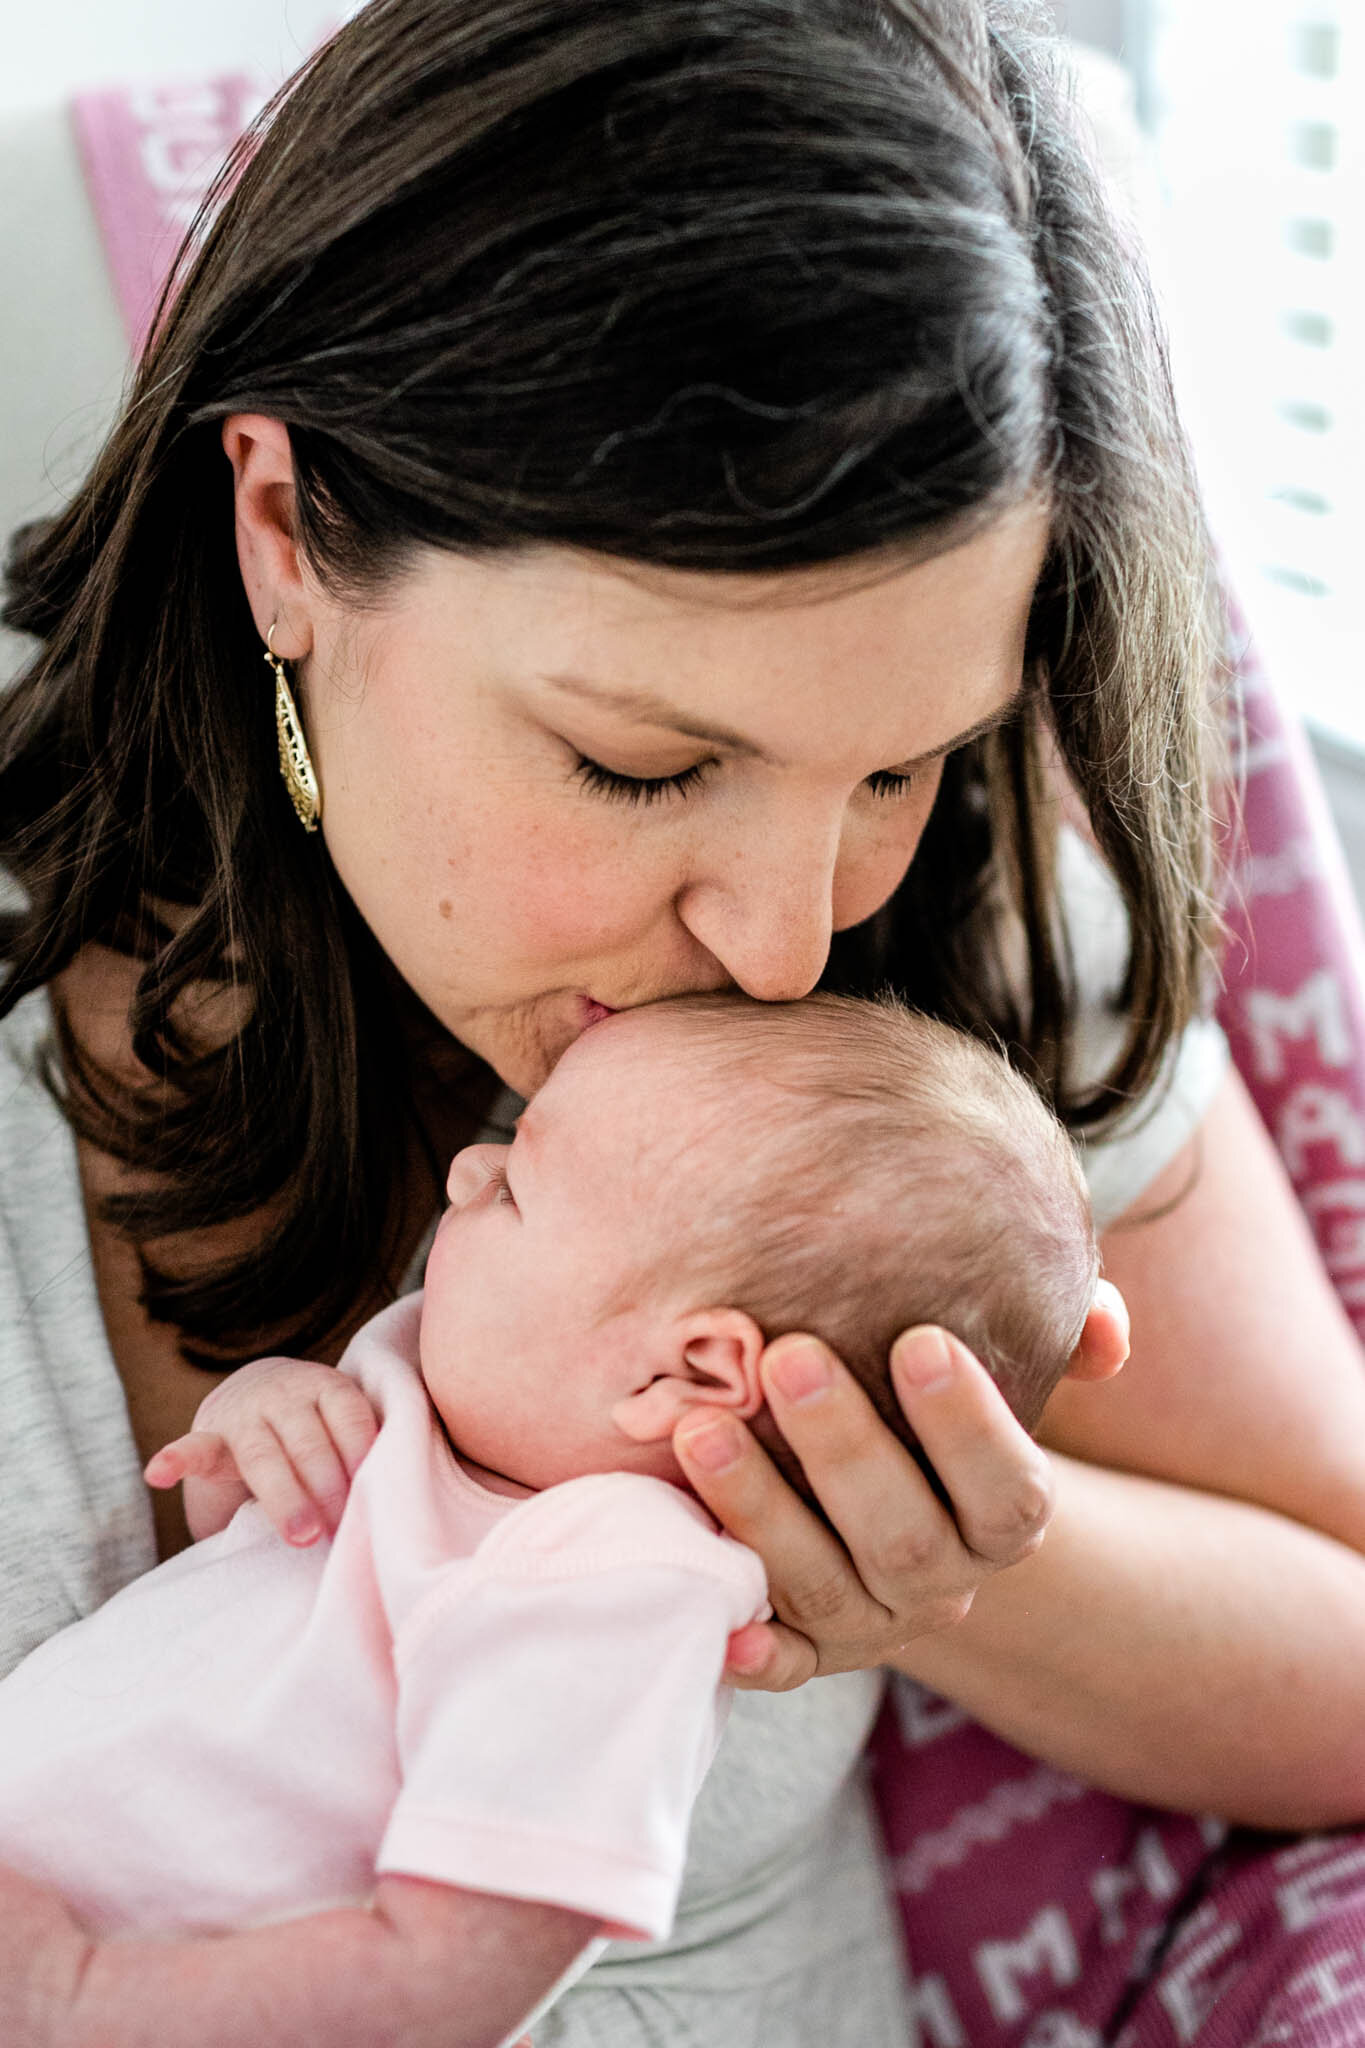 Durham Newborn Photographer | By G. Lin Photography | Mother kissing baby